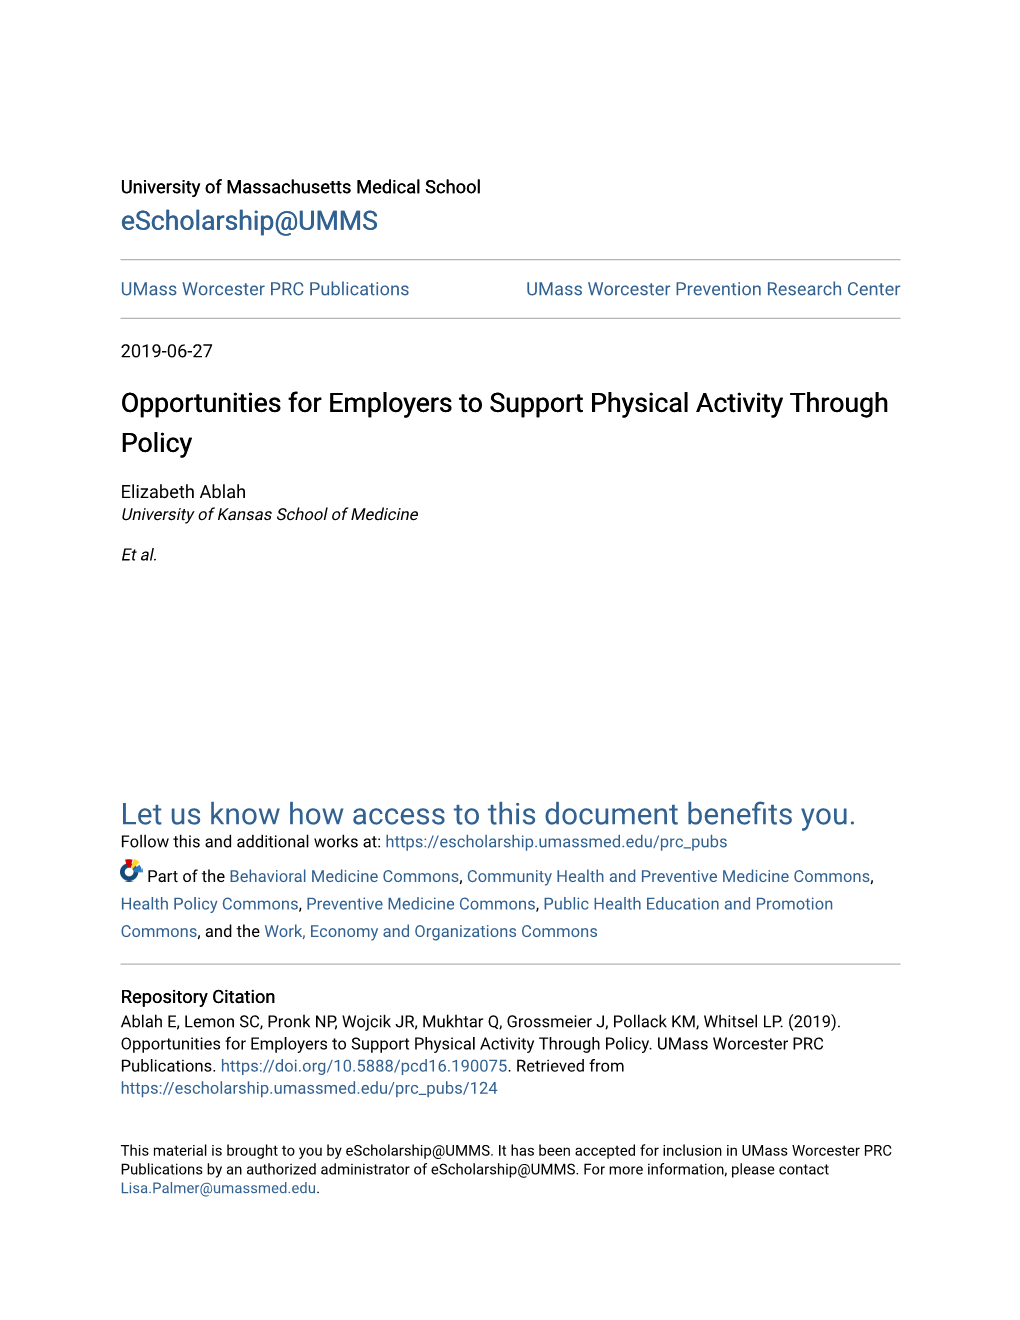 Opportunities for Employers to Support Physical Activity Through Policy